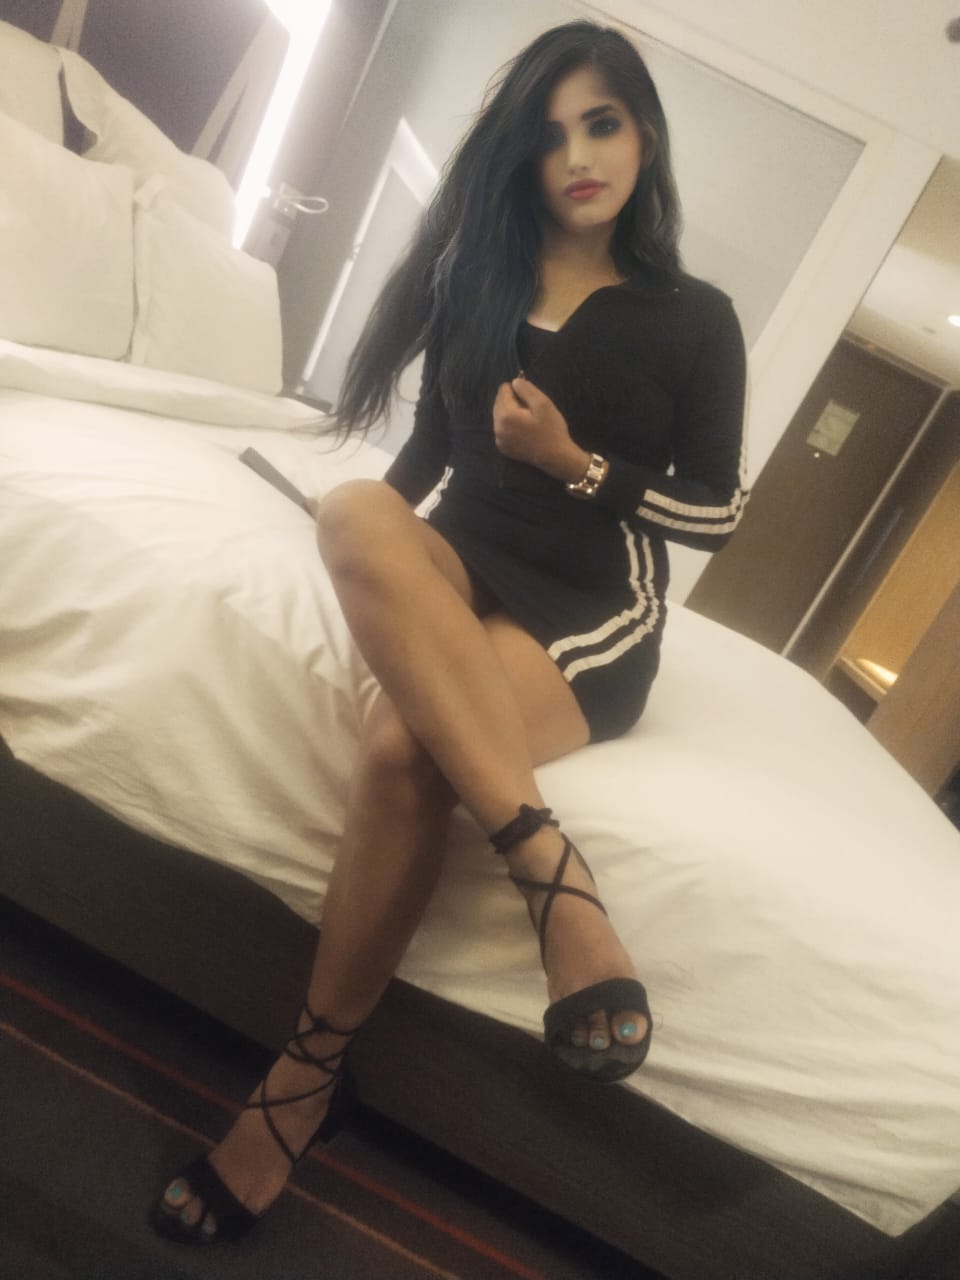 Ready for 50% off  with a side of independence Escorts Kota meet Pooja! 💋💋